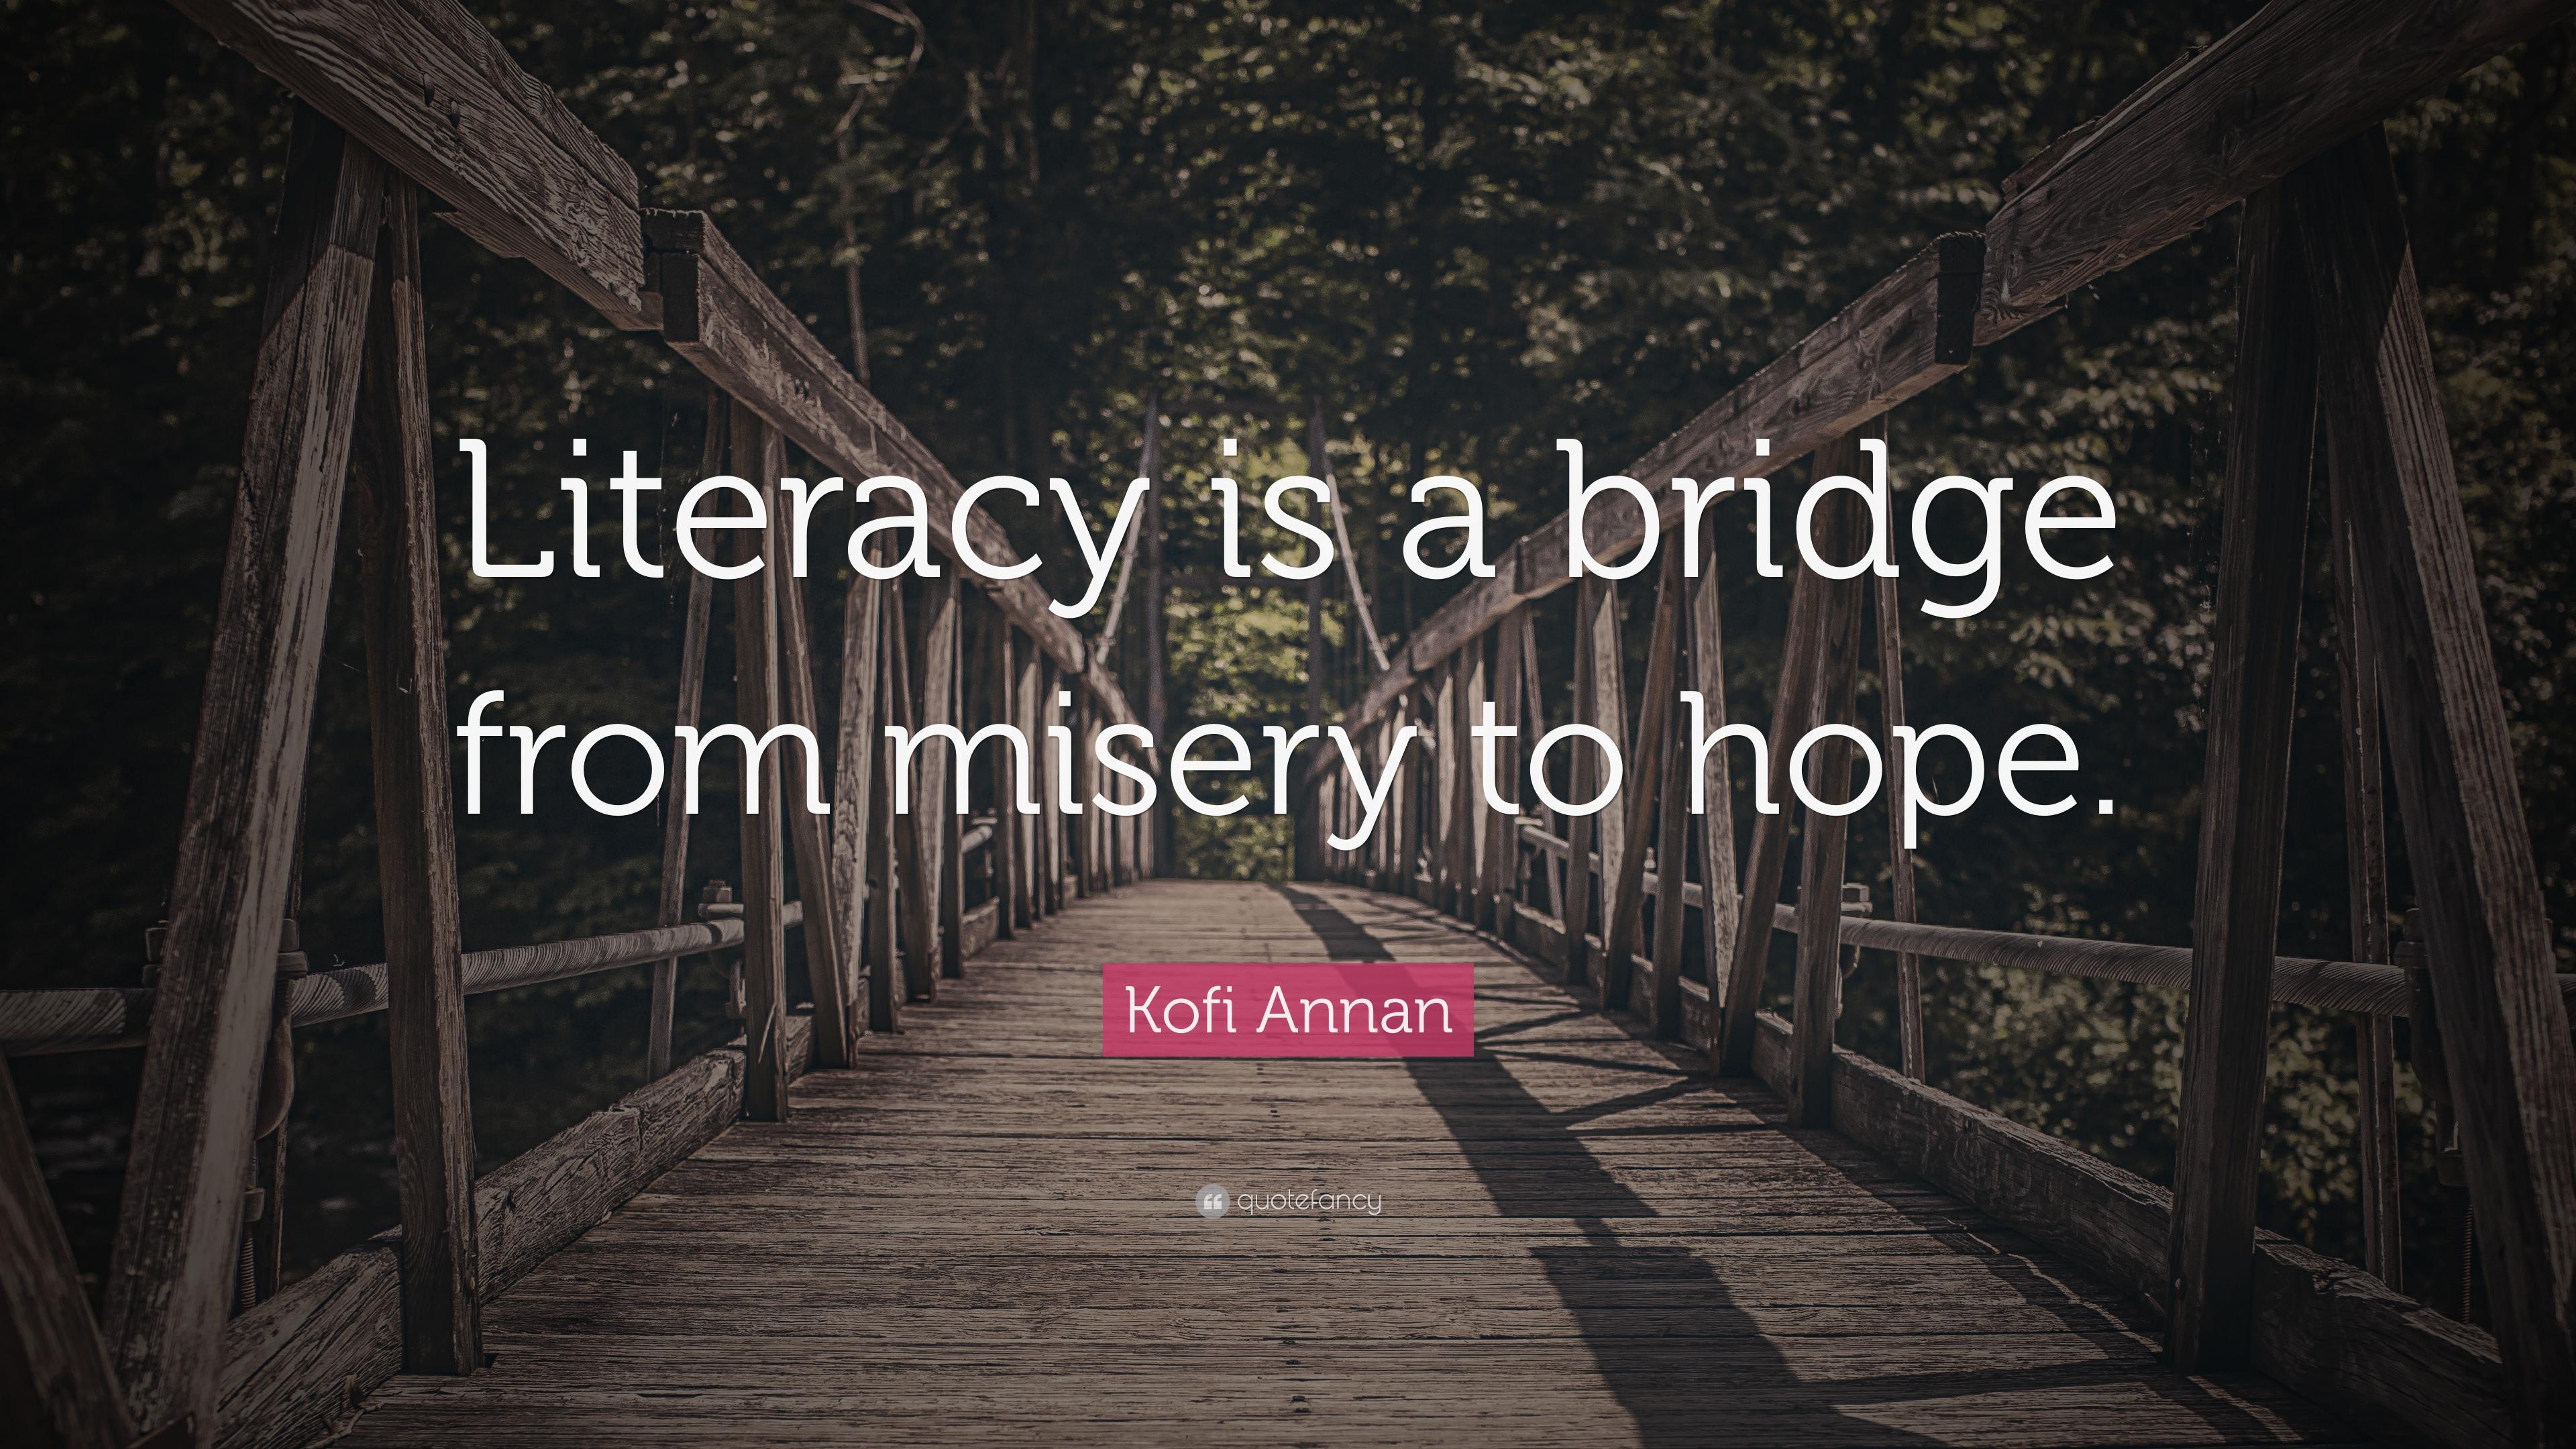 Kofi Annan Quote: “Literacy is a bridge from misery to hope